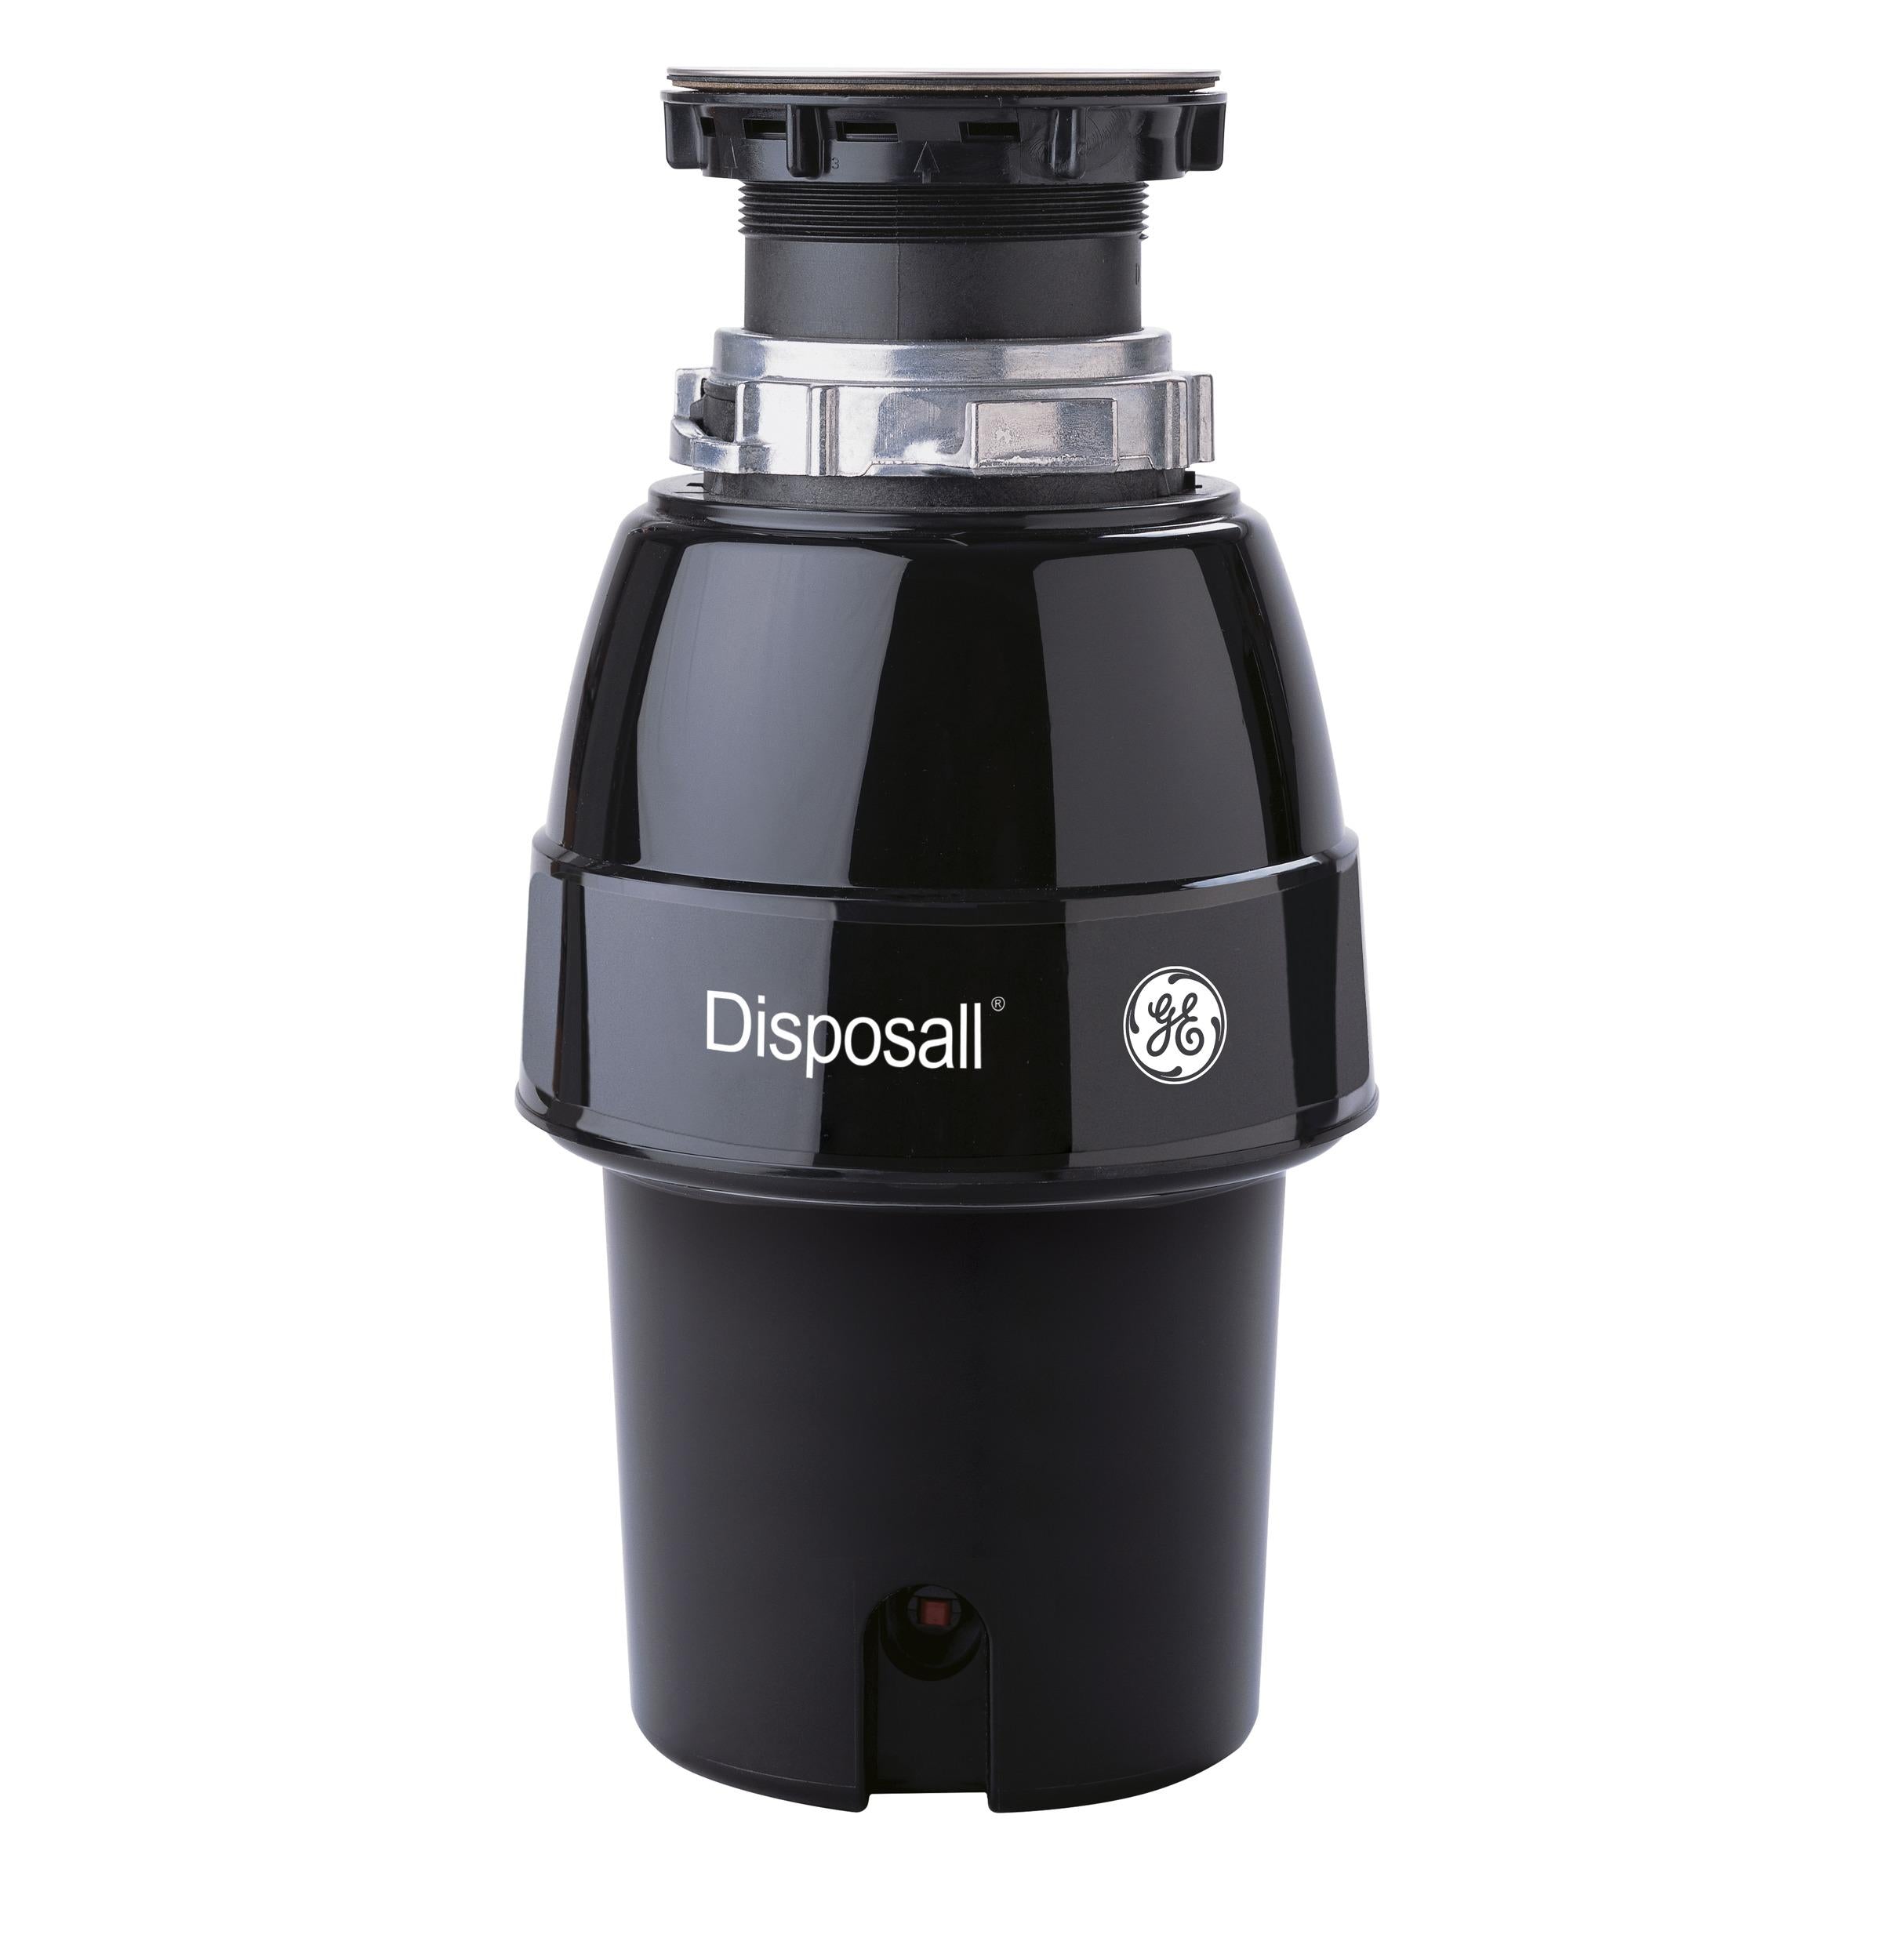 GE DISPOSALL® 1/2 HP Continuous Feed Garbage Disposer Corded